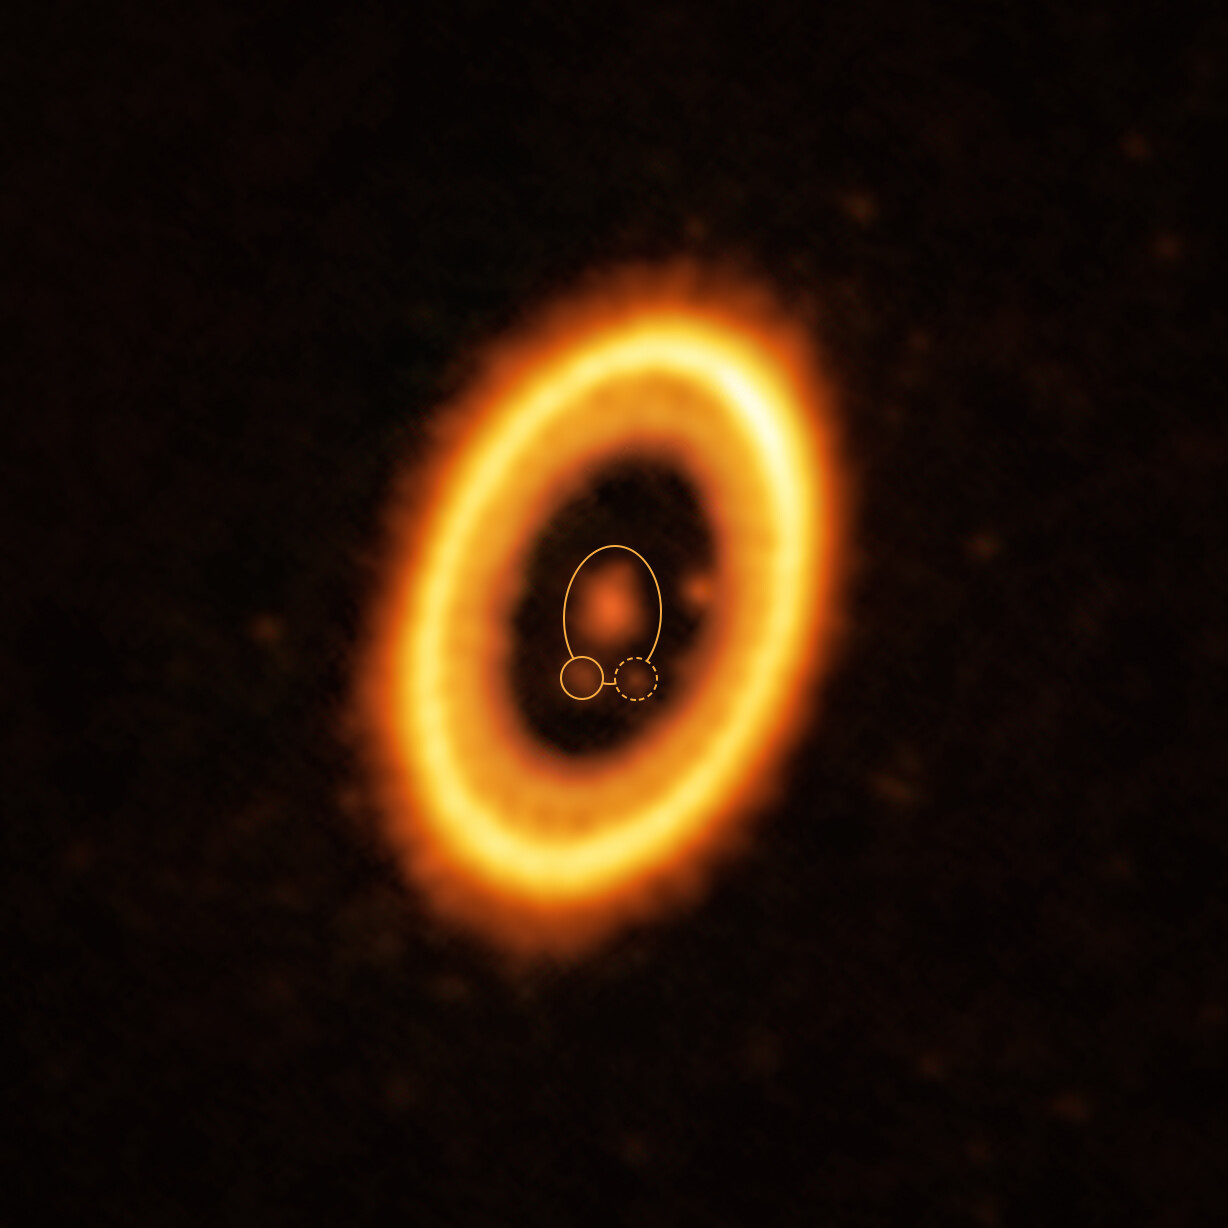 This image, taken with the Atacama Large Millimeter/submillimeter Array (ALMA), in which ESO is a partner, shows the young planetary system PDS 70, located nearly 400 light-years away from Earth. The system features a star at its centre, around which the planet PDS 70 b (highlighted with a solid yellow circle) is orbiting. On the same orbit as PDS 70b, indicated by a solid yellow ellipse, astronomers have detected a cloud of debris (circled by a yellow dotted line) that could be the building blocks of a new planet or the remnants of one already formed. The ring-like structure that dominates the image is a circumstellar disc of material, out of which planets are forming. There is in fact another planet in this system: PDS 70c, seen at 3 o’clock right next to the inner rim of the disc. Credit: ALMA (ESO/NAOJ/NRAO) /Balsalobre-Ruza et al.